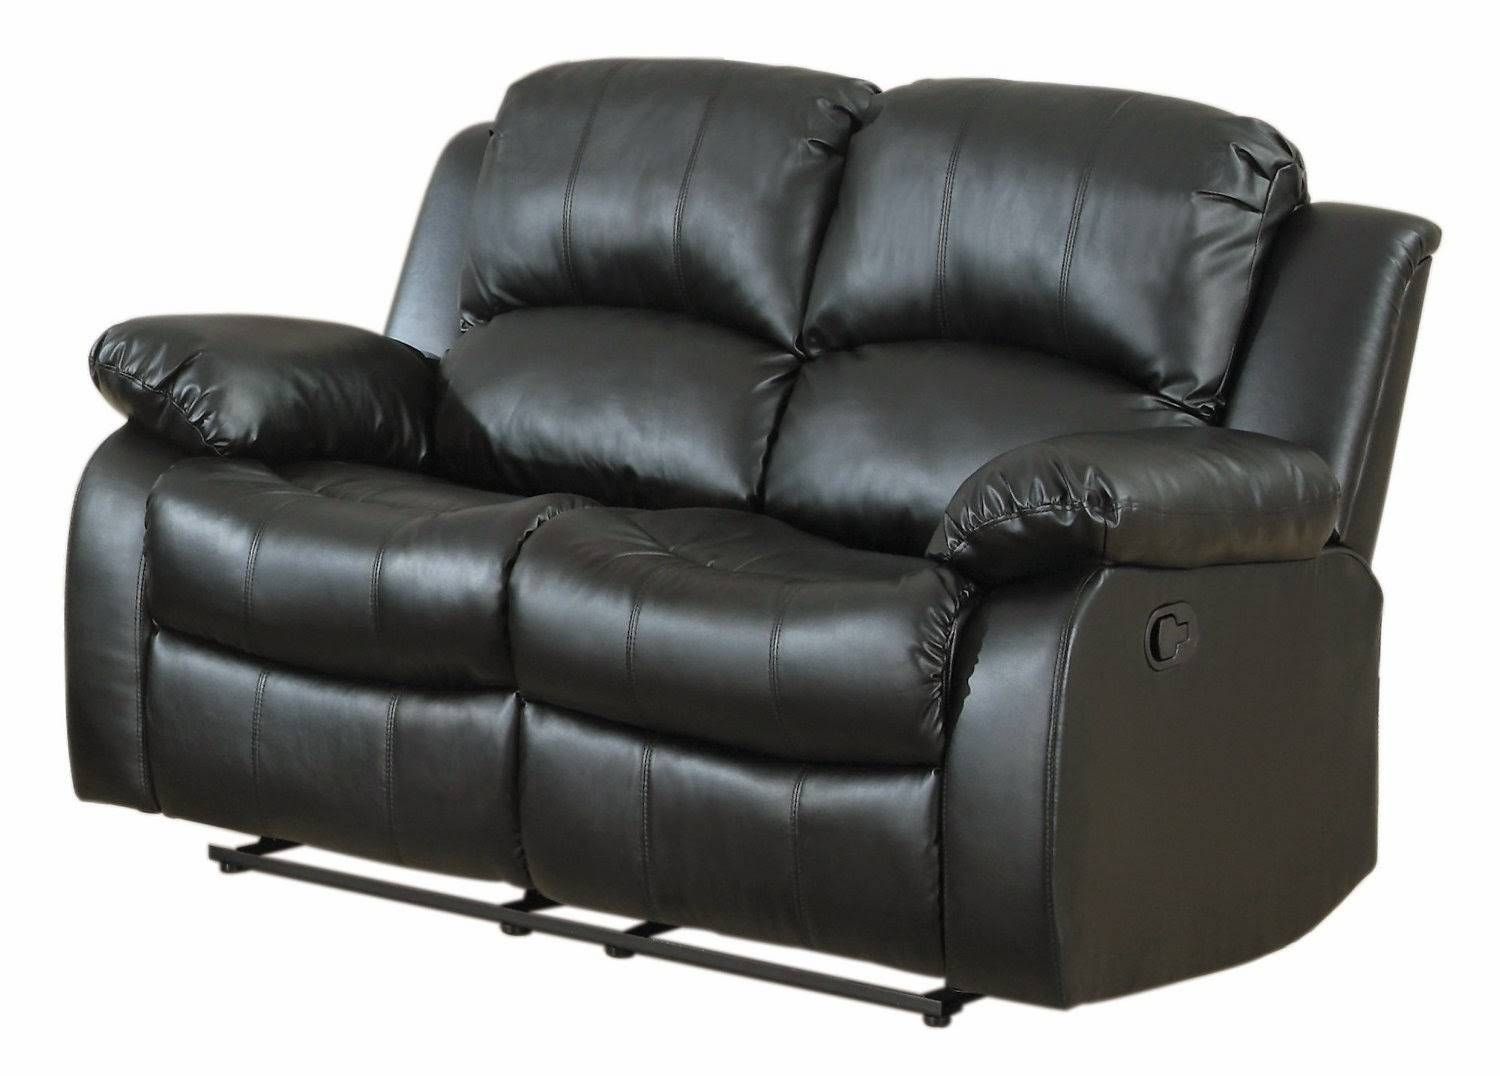 Reclining Sofas For Sale: Berkline Leather Reclining Sofa Costco Regarding Berkline Recliner Sofas (Photo 7 of 15)